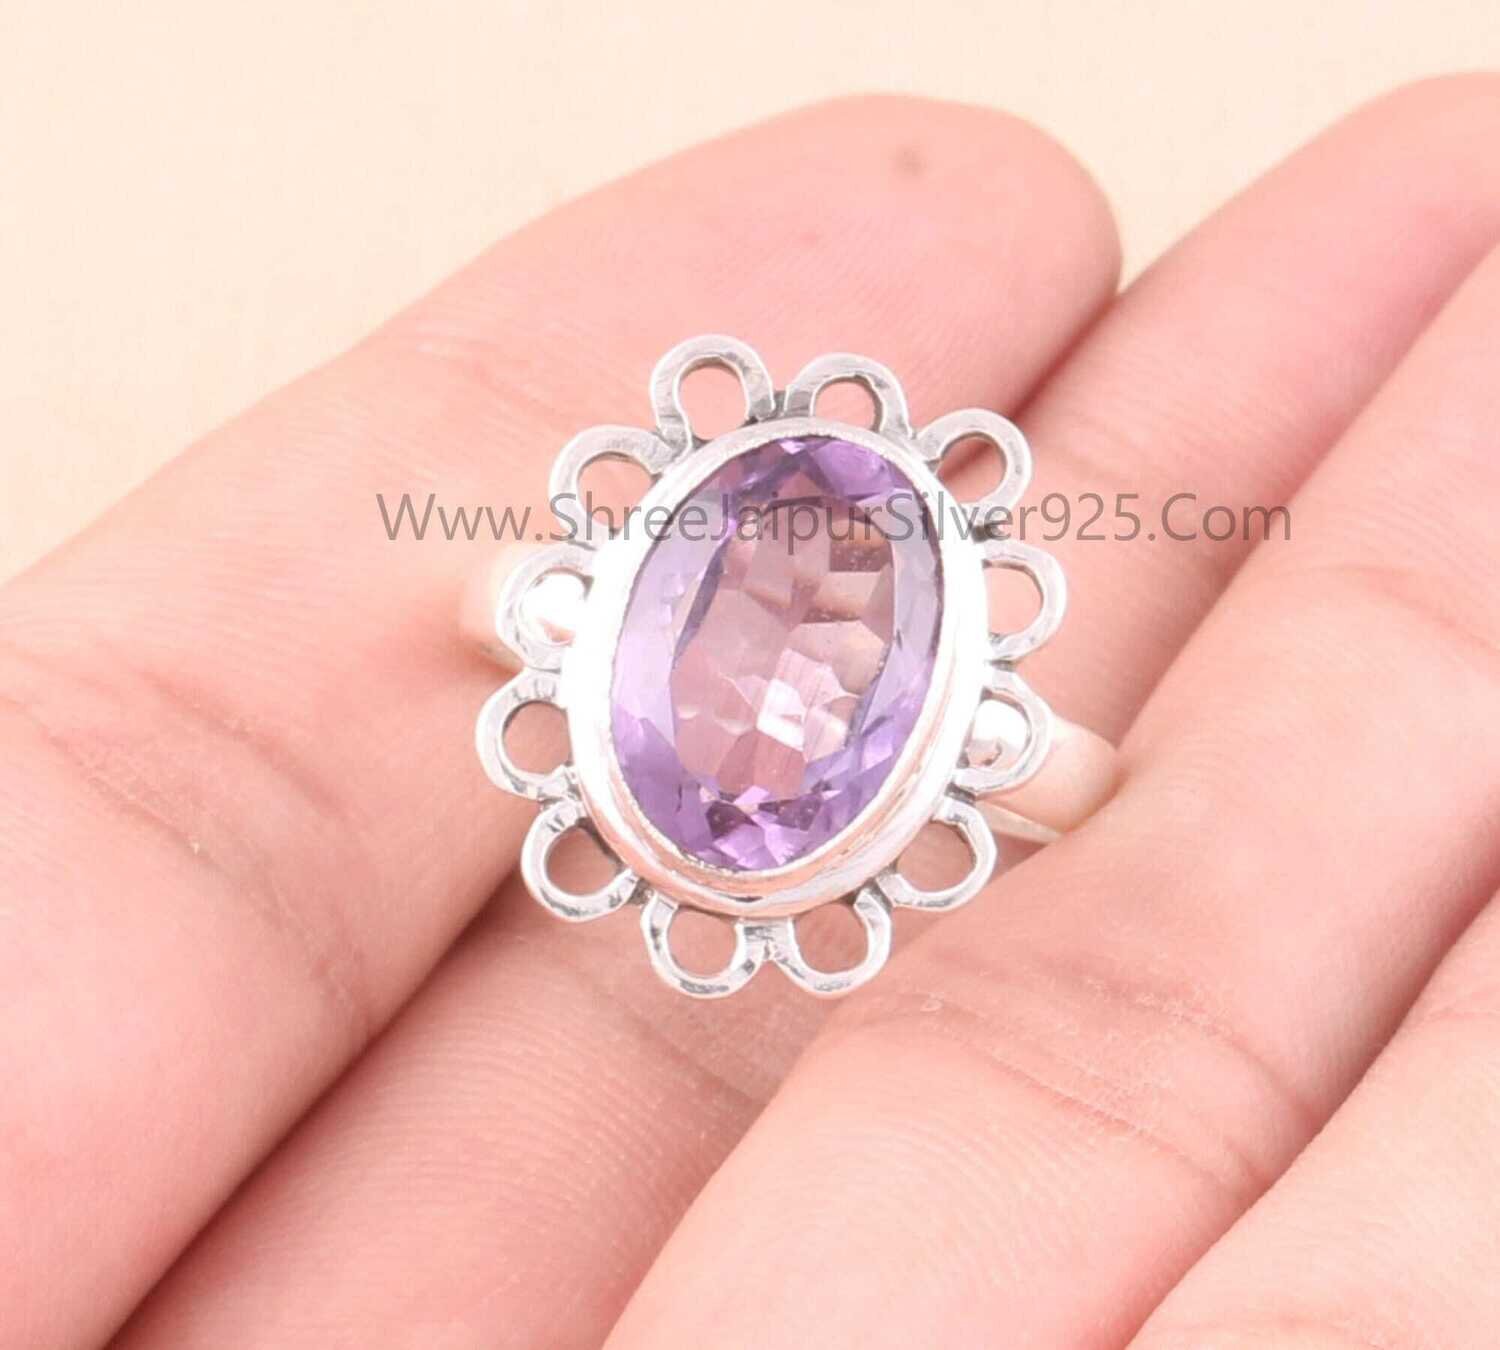 Amethyst Oval Cut Stone Solid 925 Sterling Silver Ring Handmade Silver Floral Designer Ring For Wedding Anniversary Gifts BirthdayBirthstone